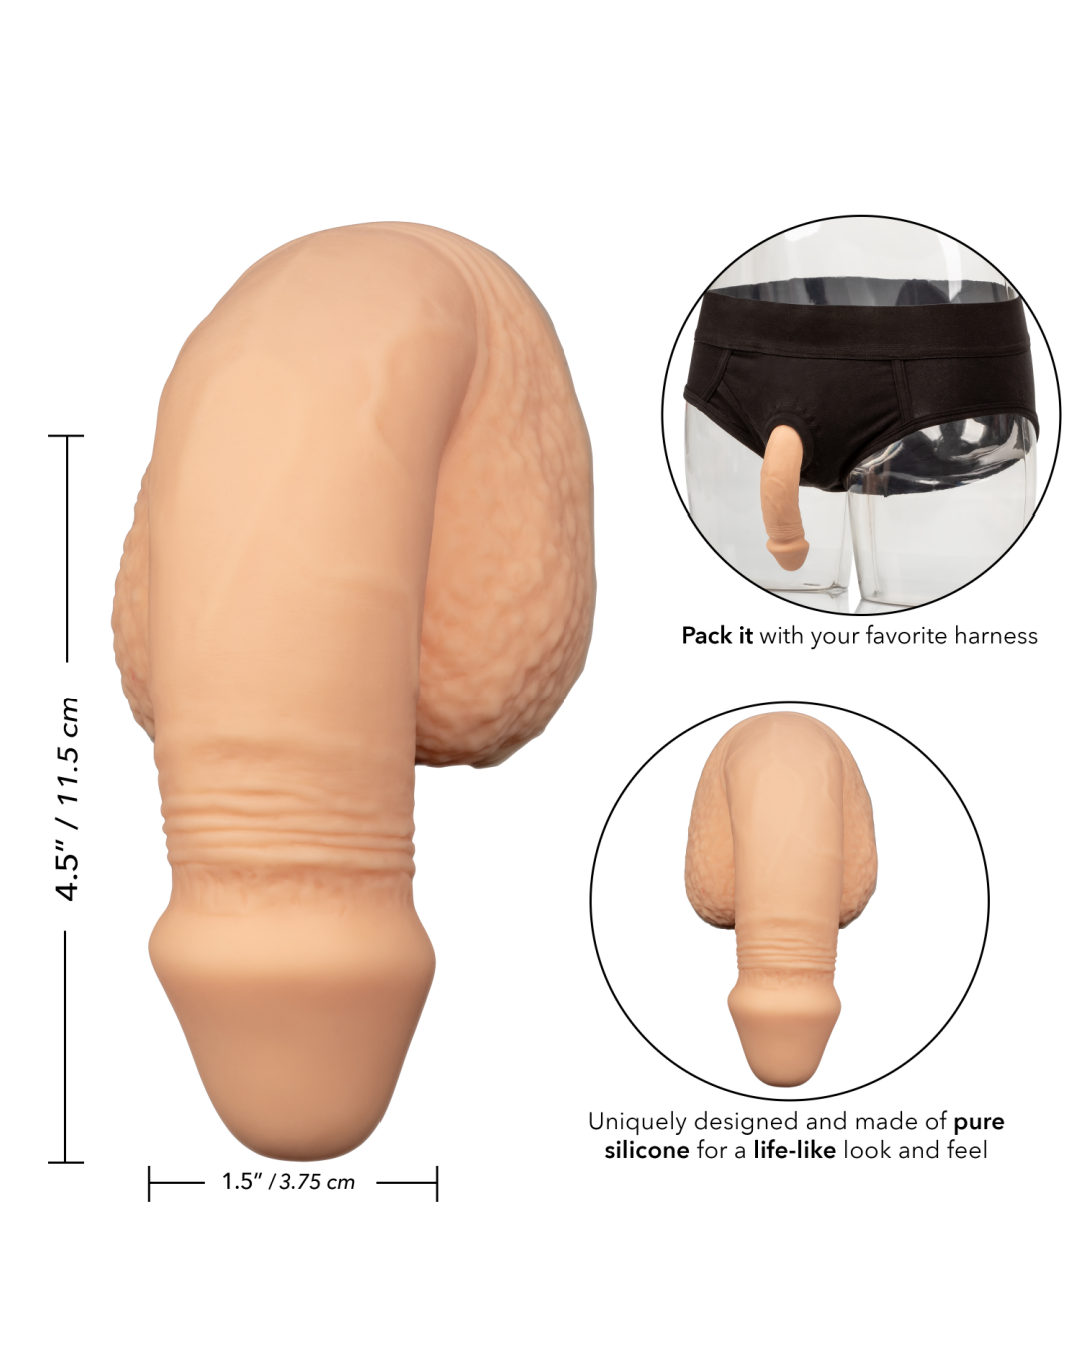 Packer Gear Silicone Packing Penis 5 Inch - Vanilla